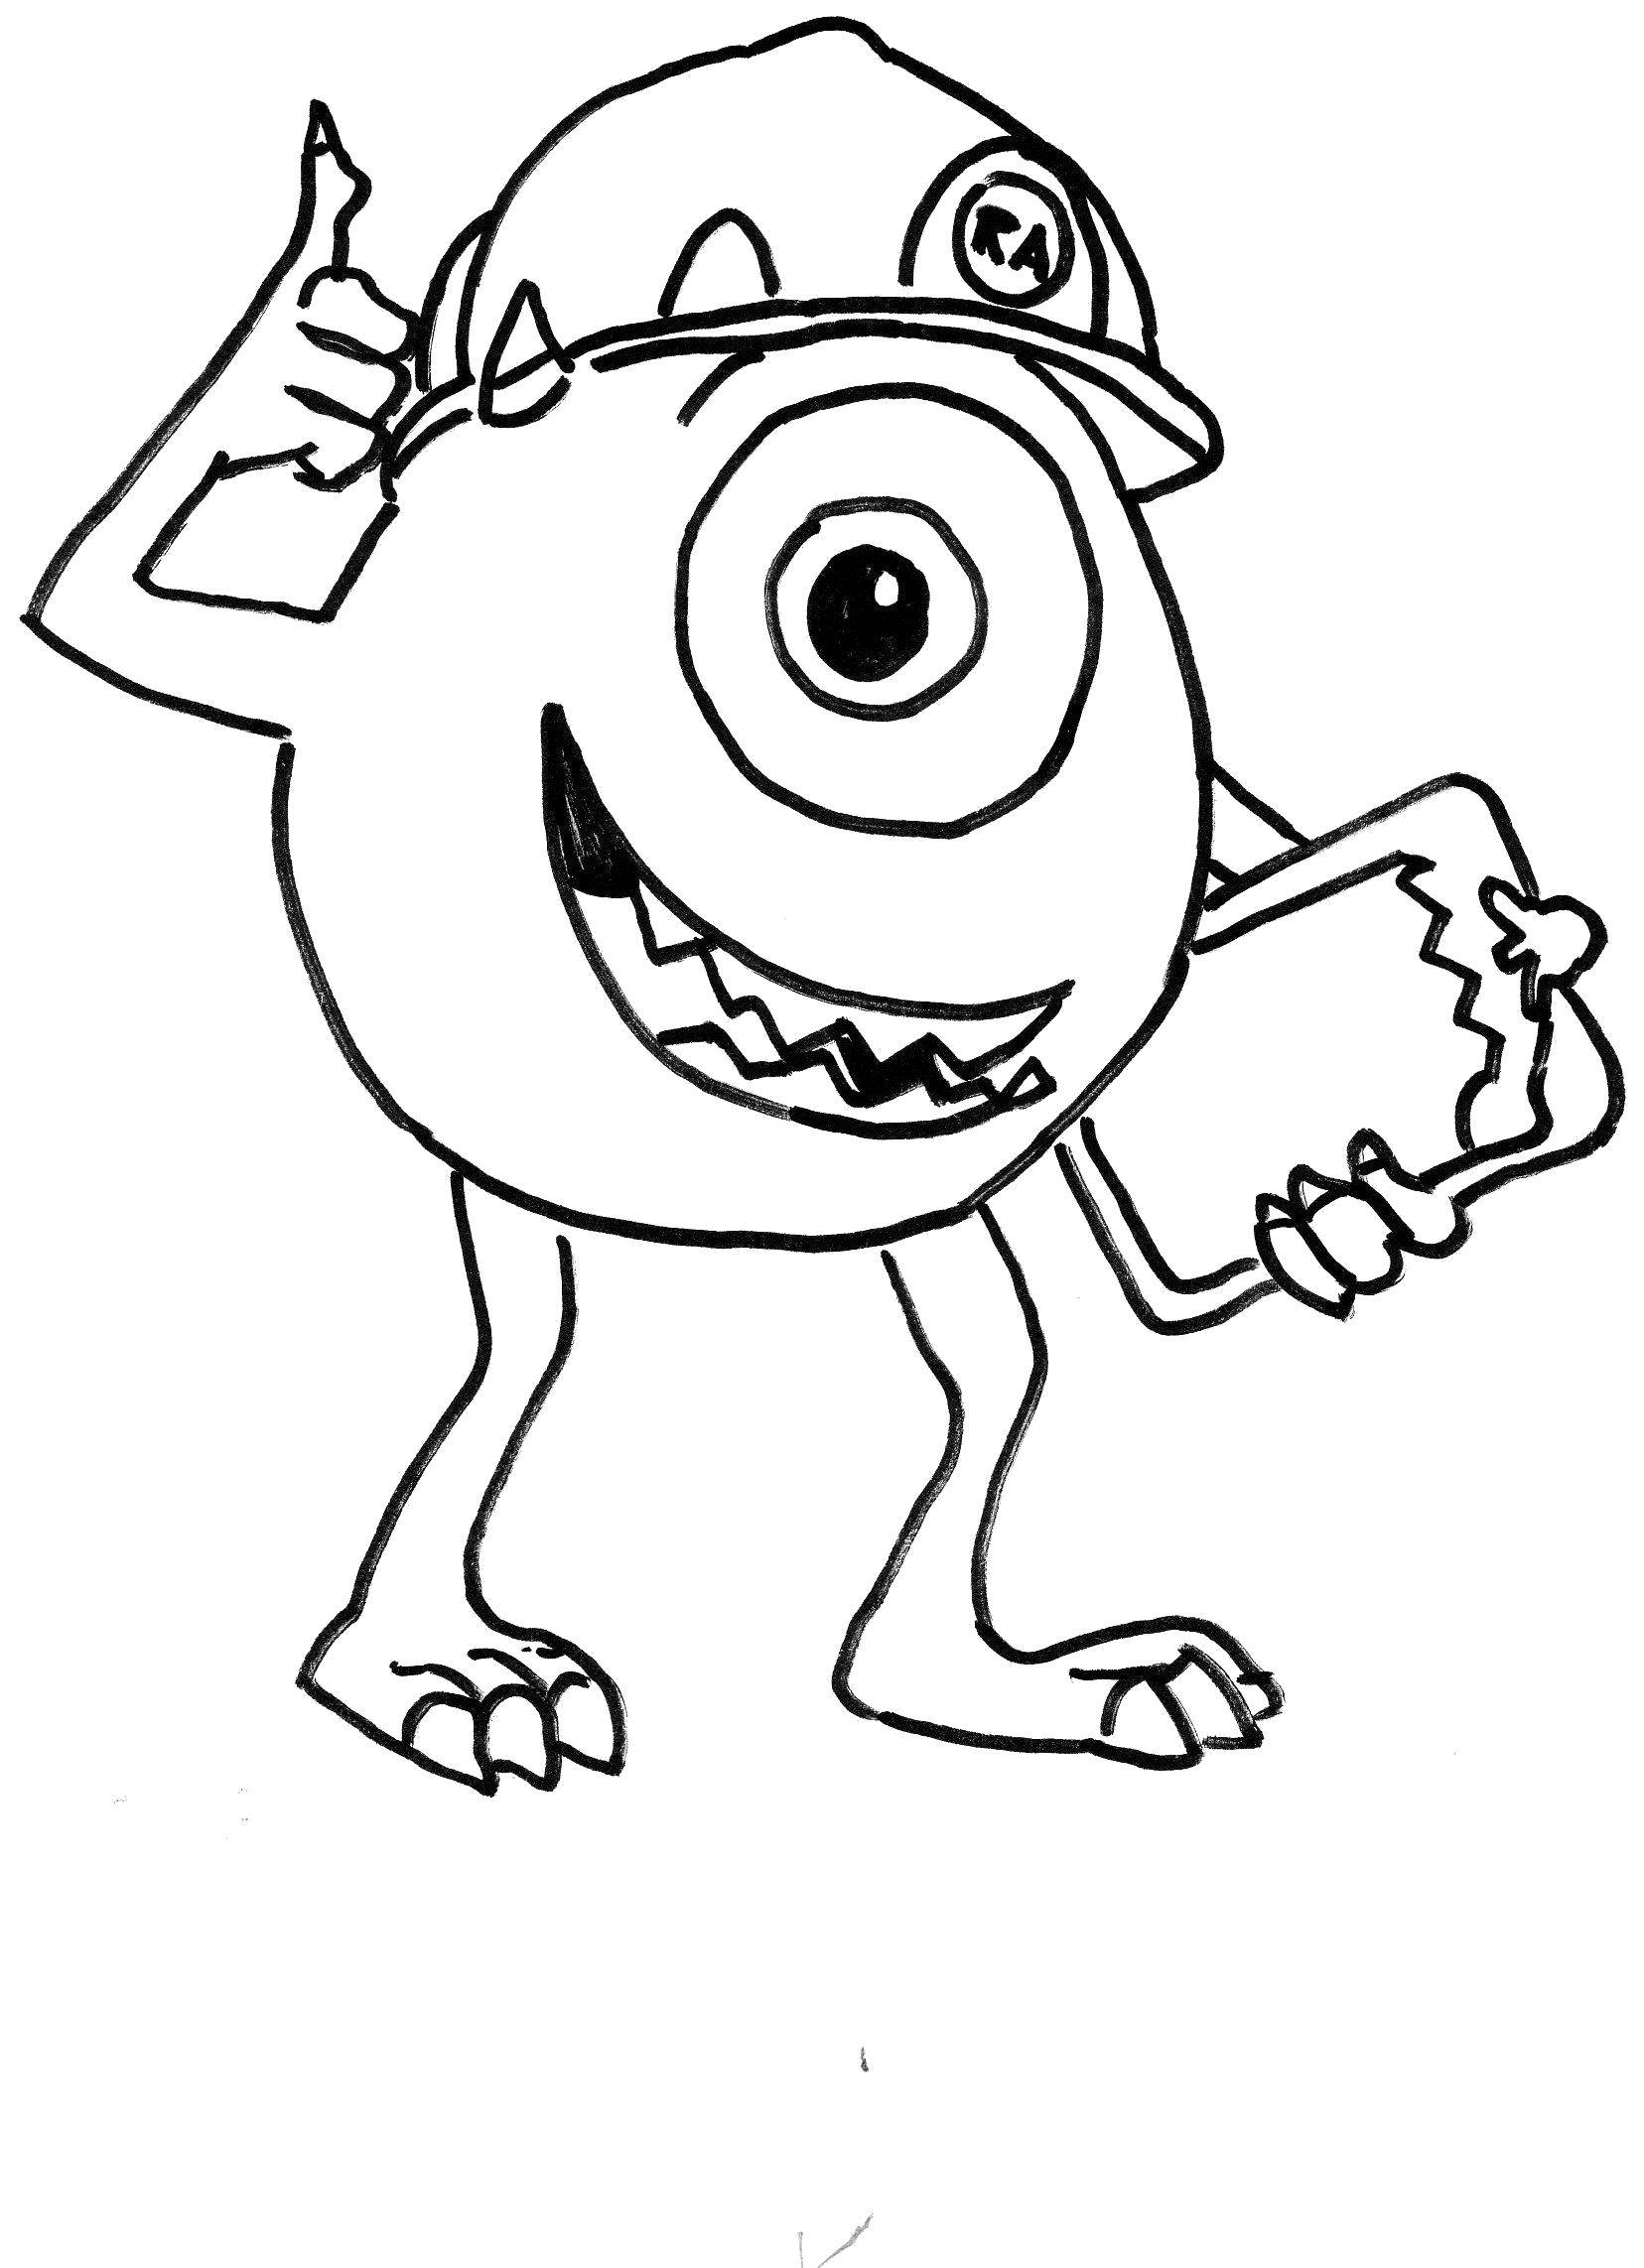 Coloring Monster from monsters Inc. Category Disney cartoons. Tags:  Disney, Monsters Inc.